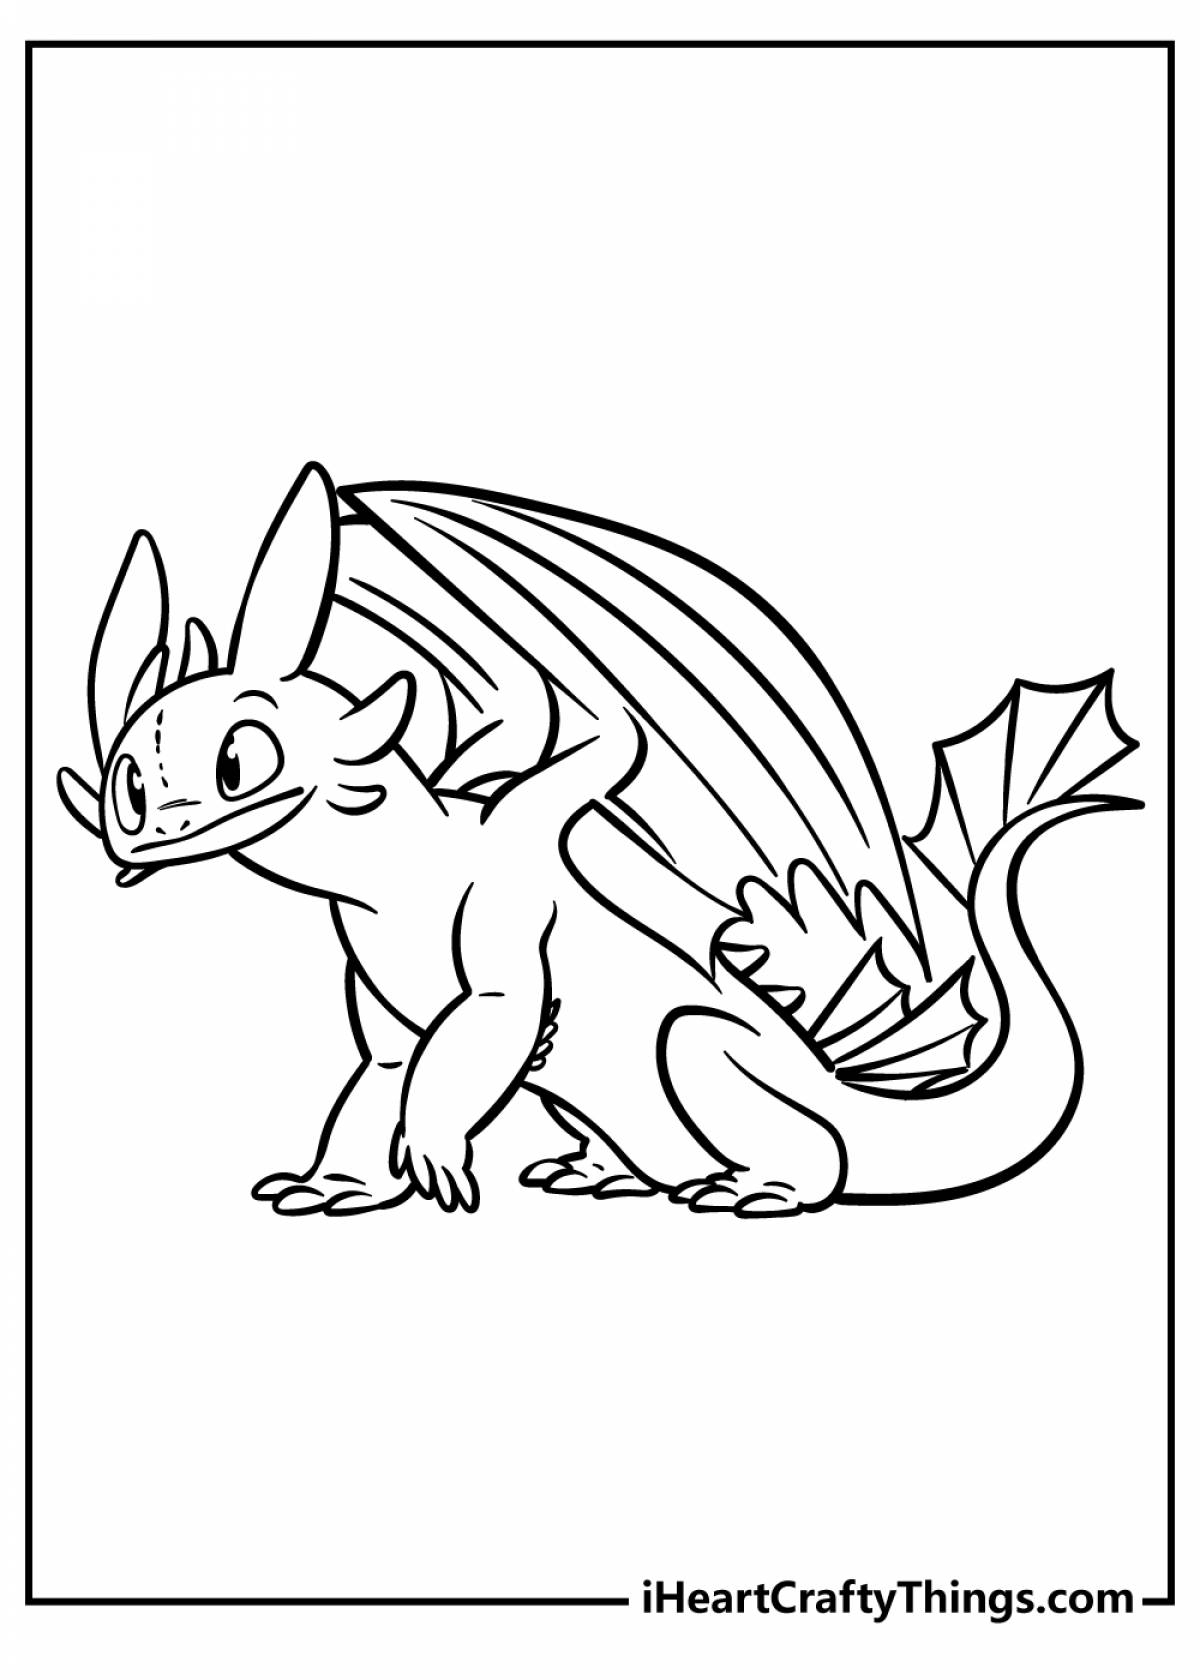 Amazing penguin dragon coloring page